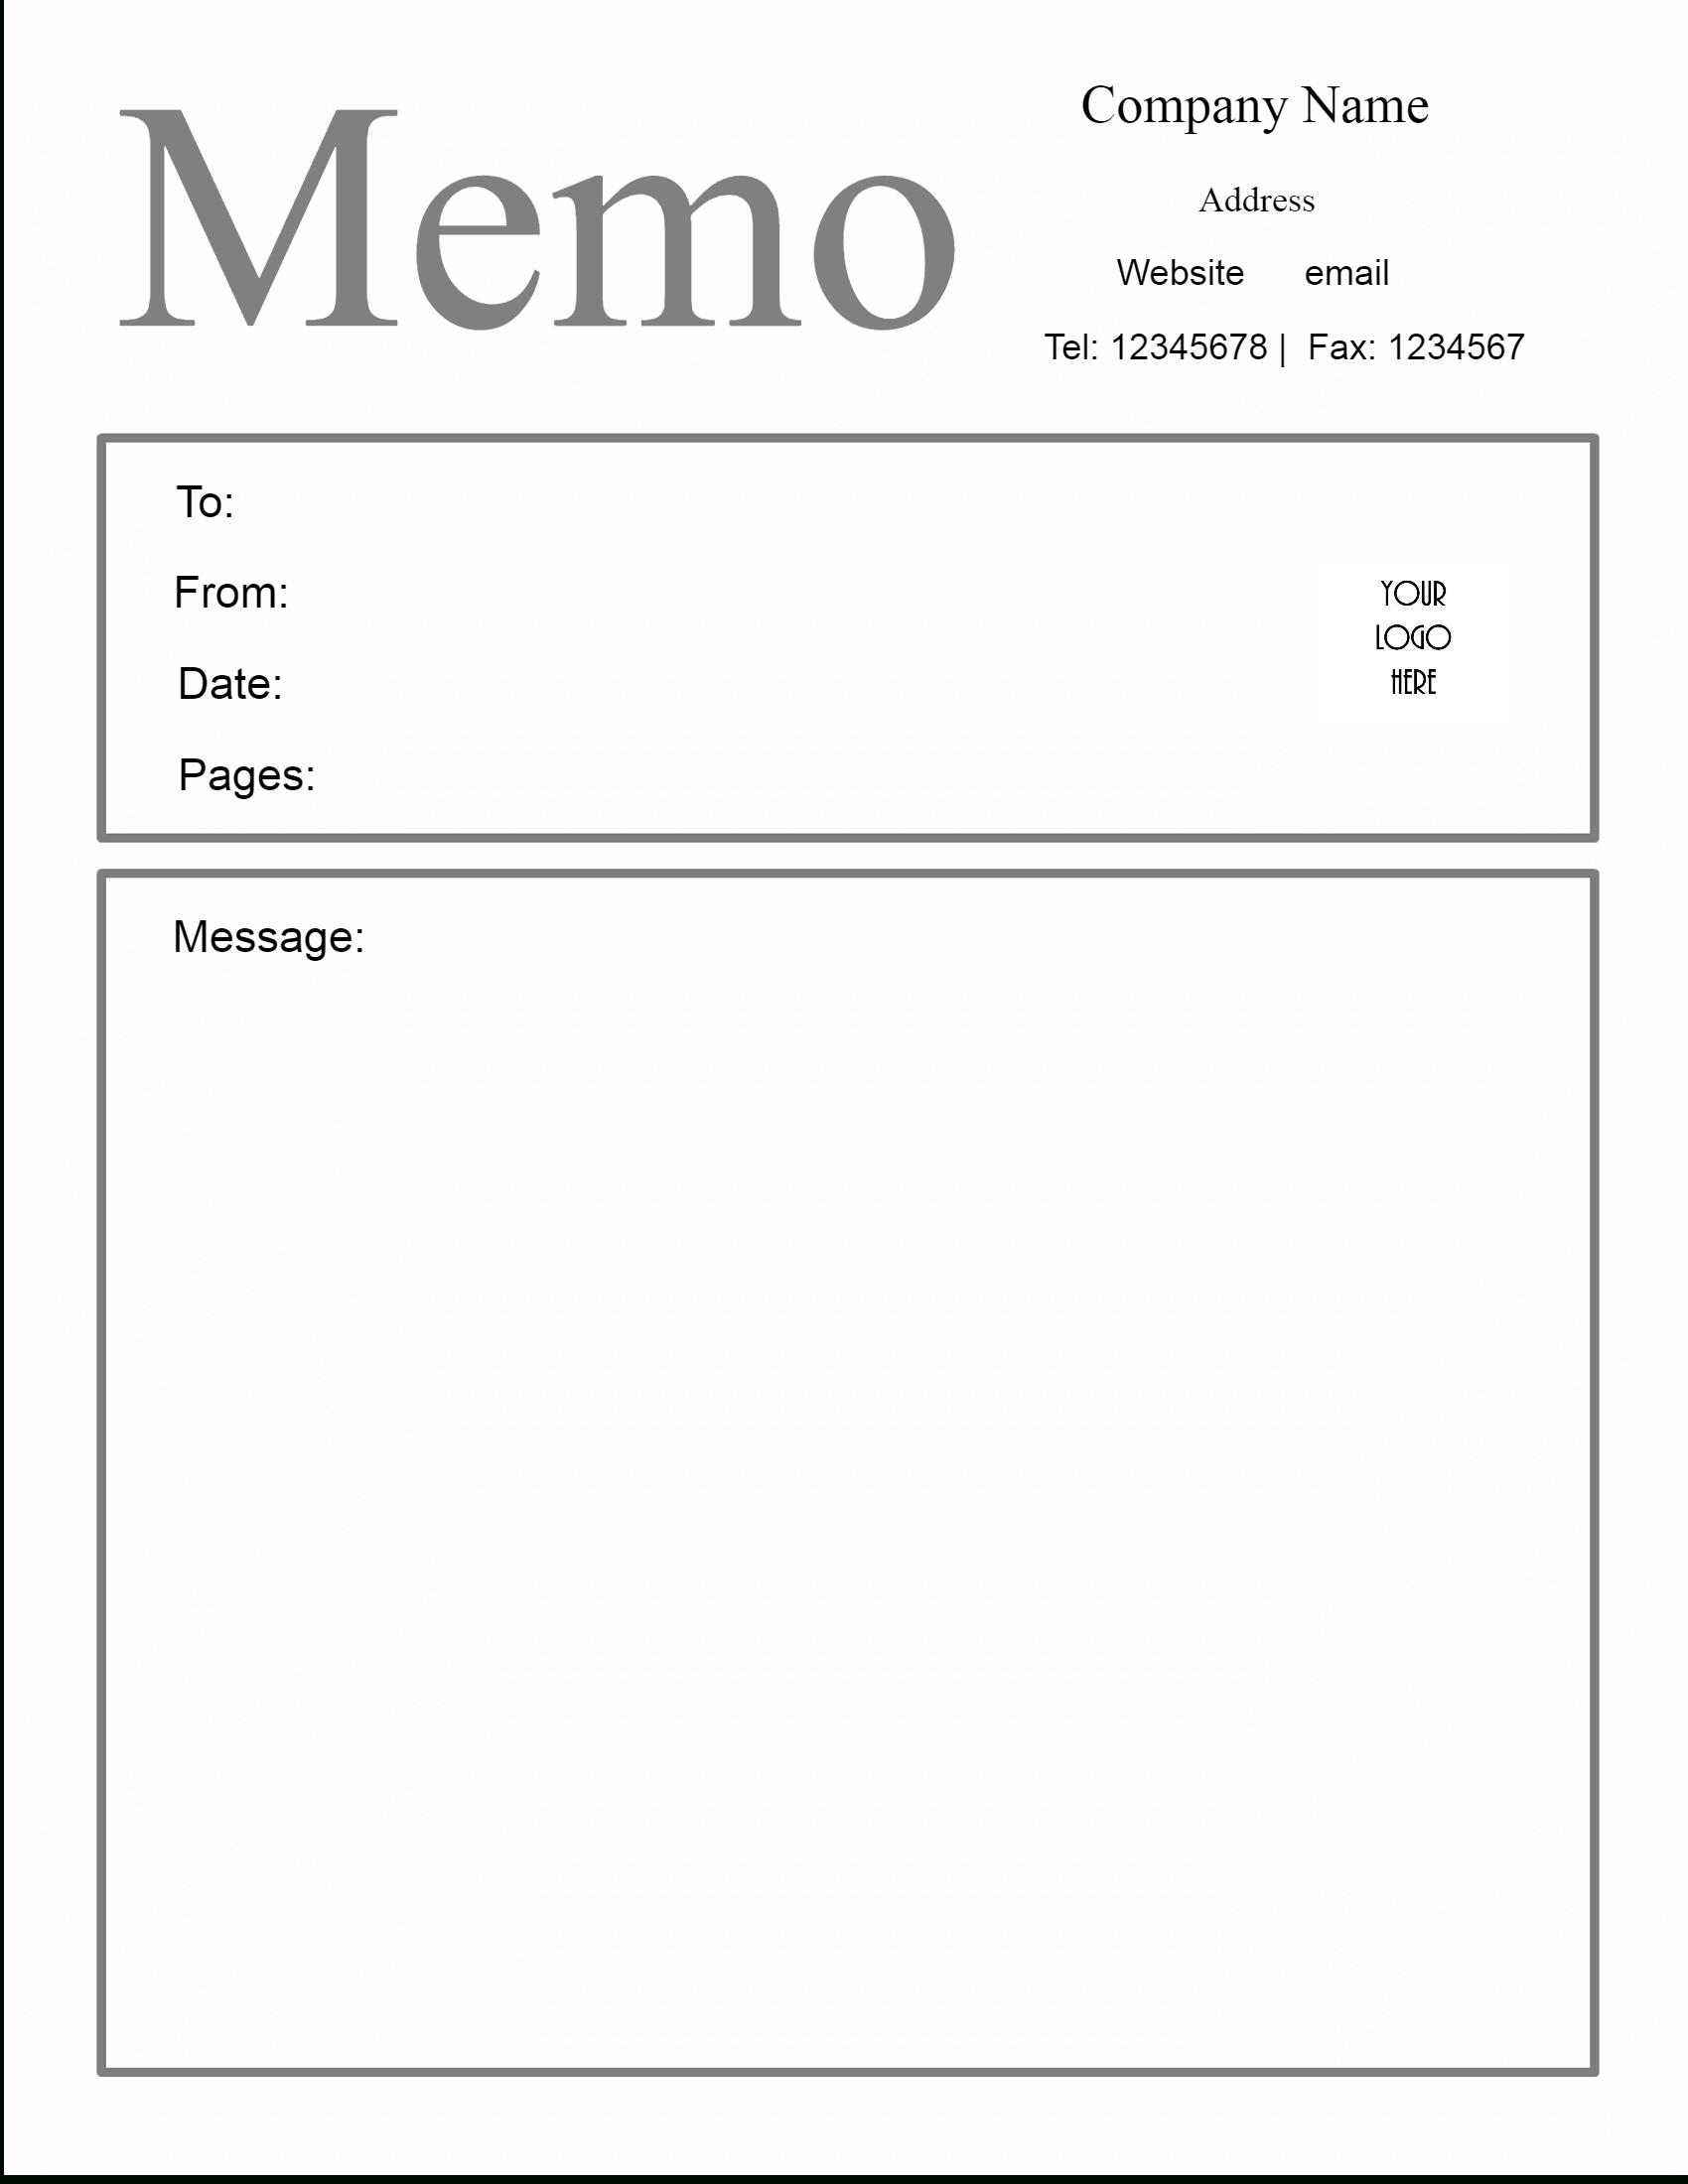 001 Memo Templates For Word Template Ideas Breathtaking Free Pertaining To Memo Template Word 2013